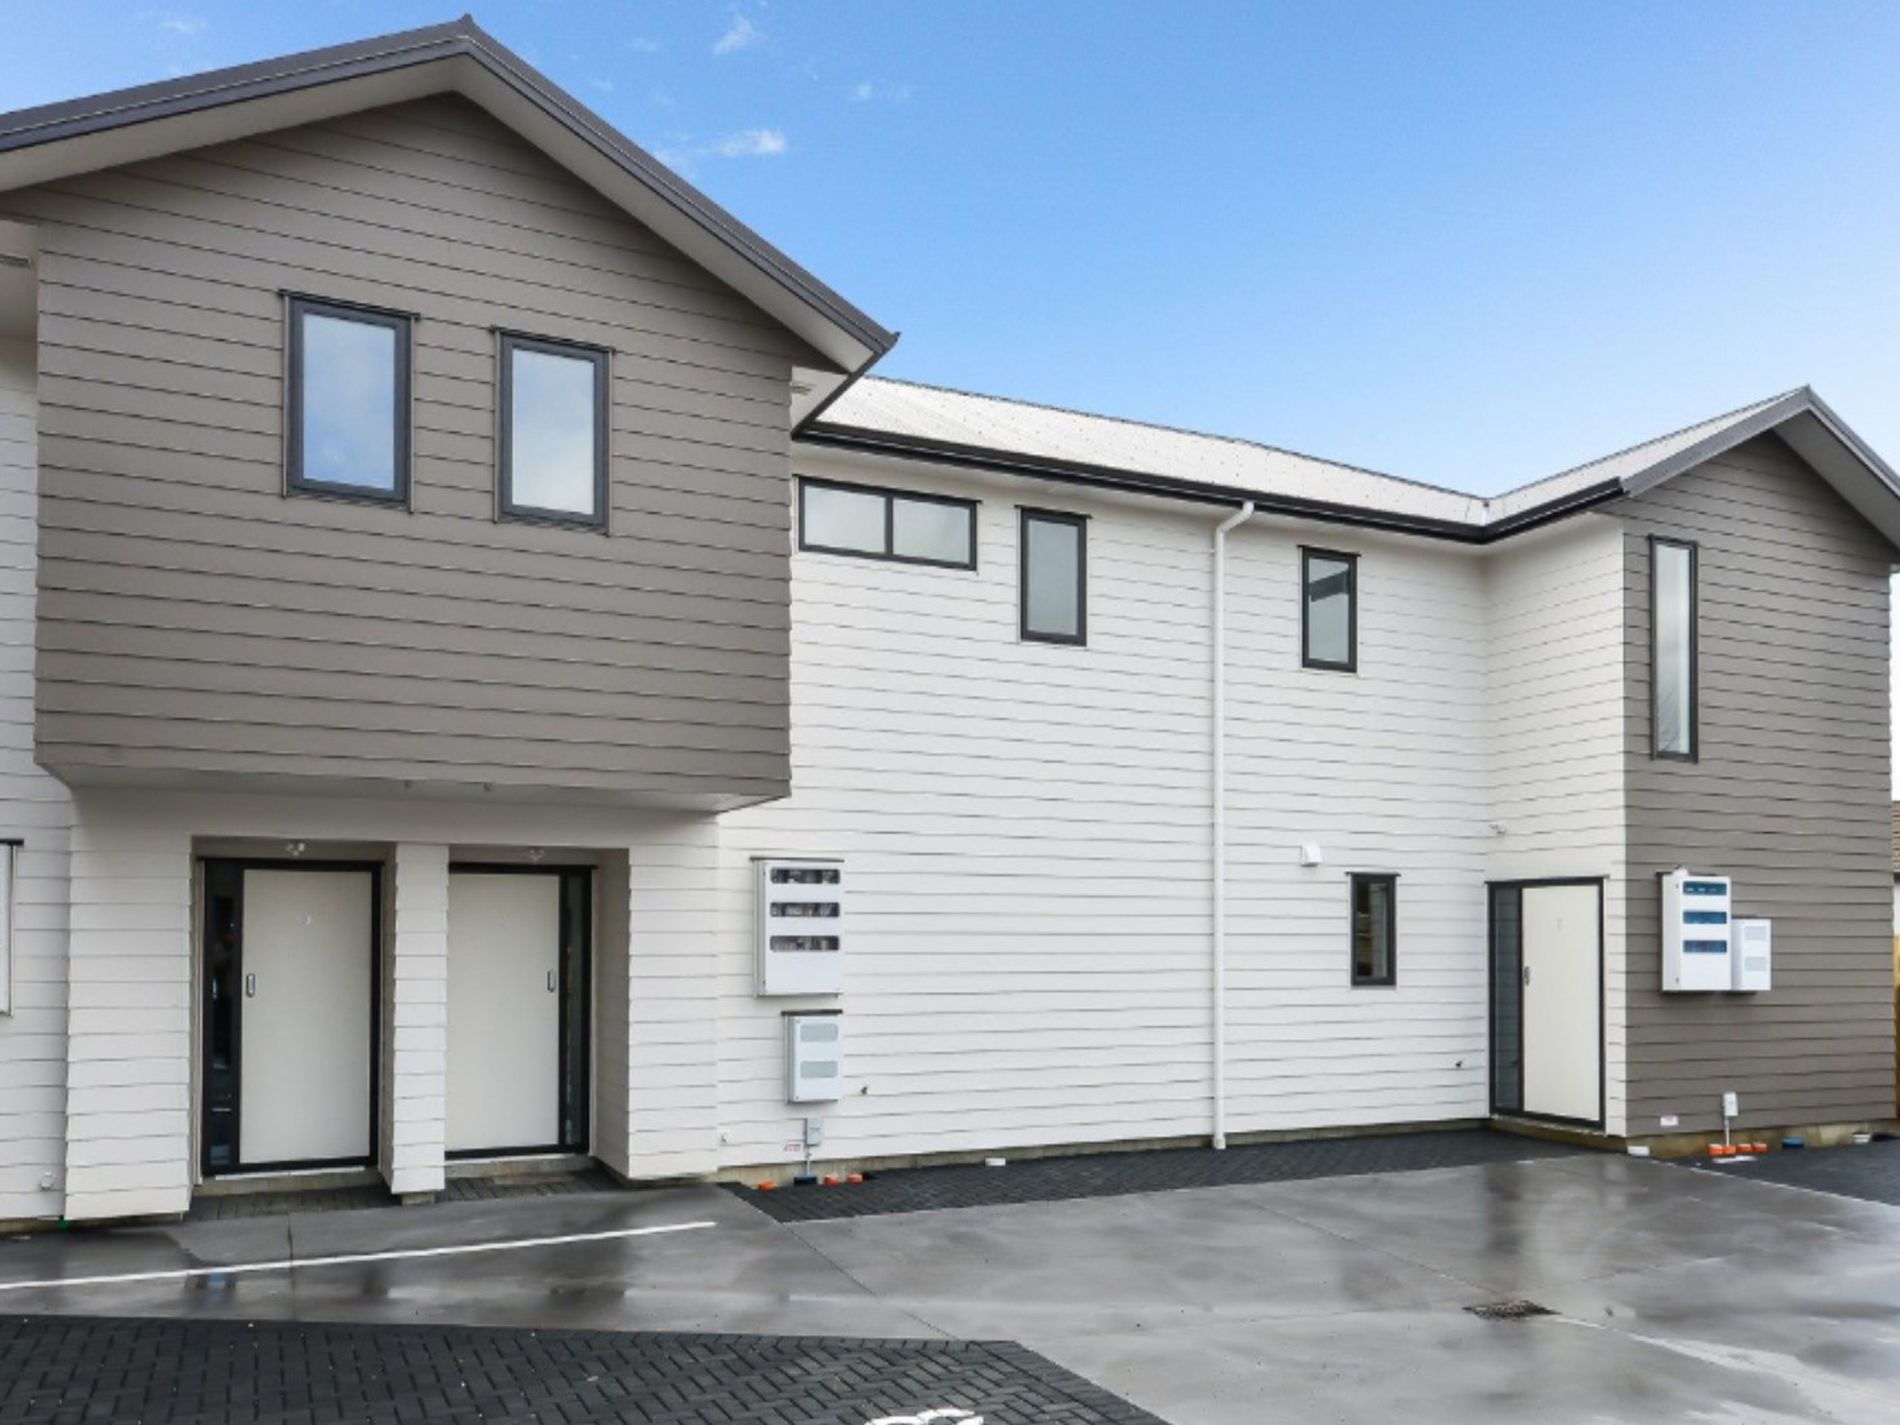 Room C - Unit 1 / 188  Ulster Street, Whitiora